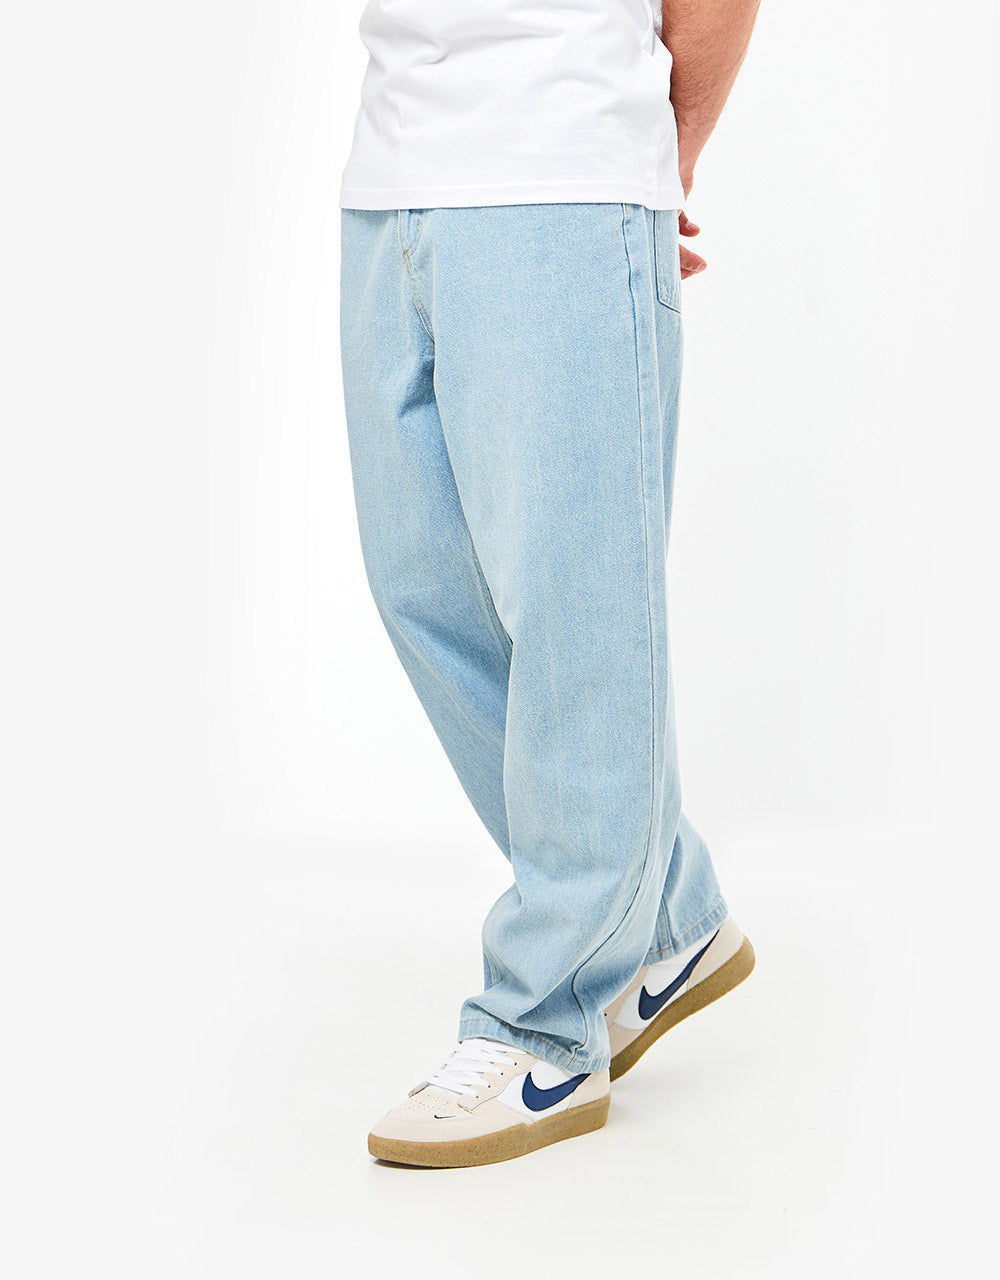 Theories of Atlantis Plaza Jeans - Lightwash Blue – Route One